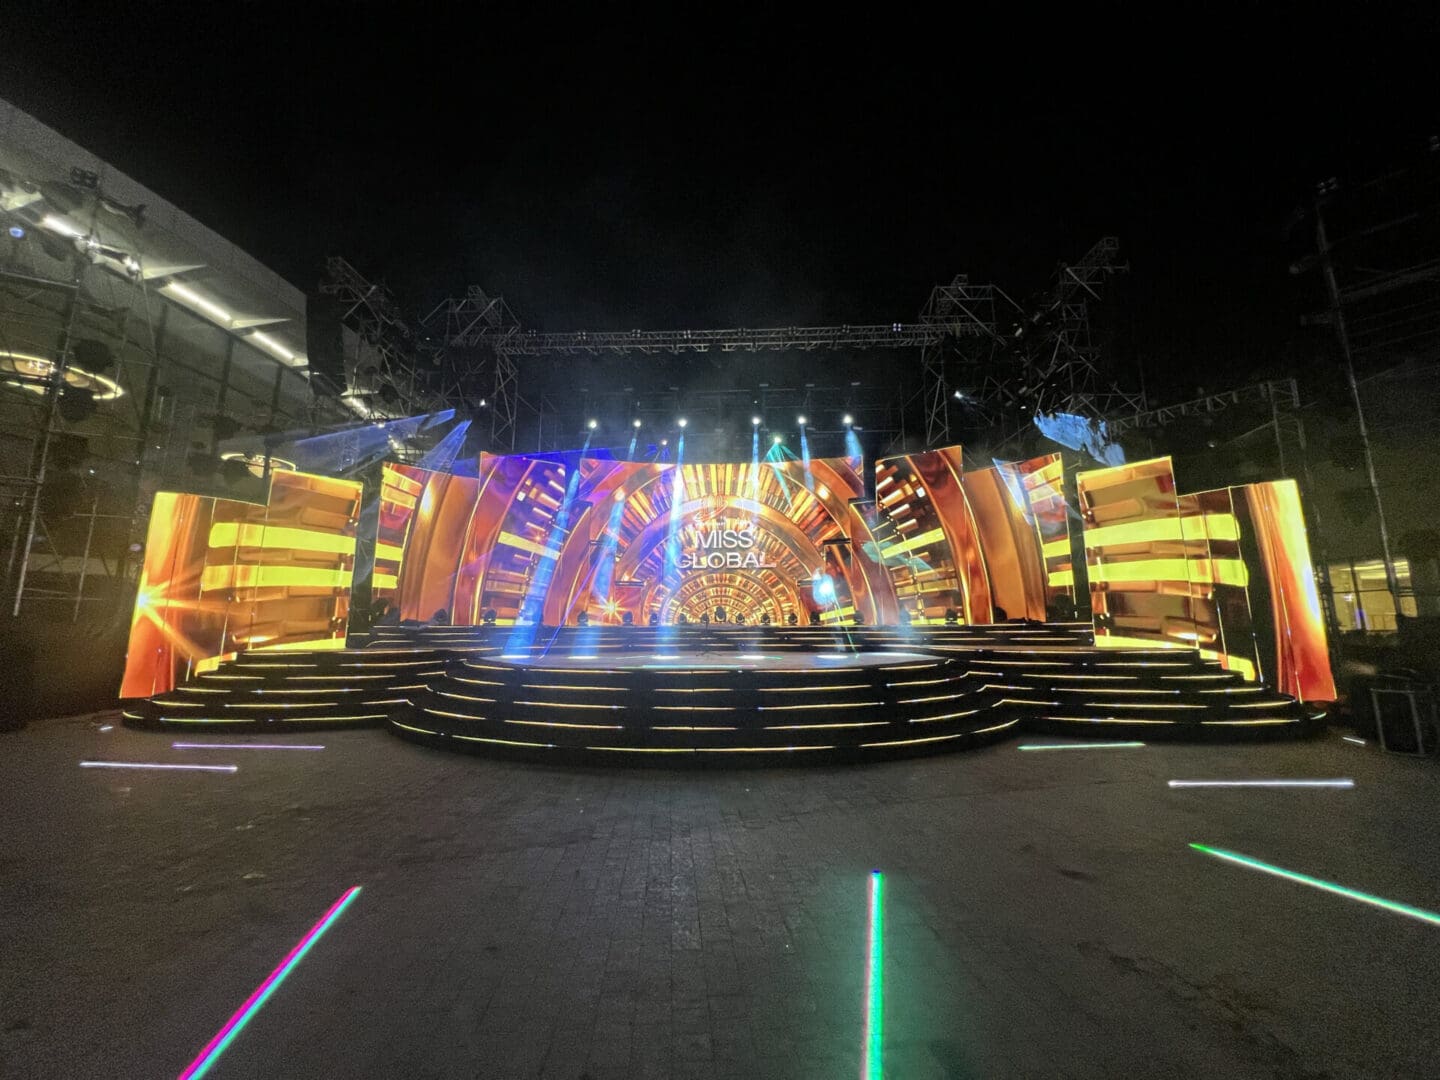 Brightly lit stage setup for miss global event at night with colorful lighting and large led screens displaying the event's title.